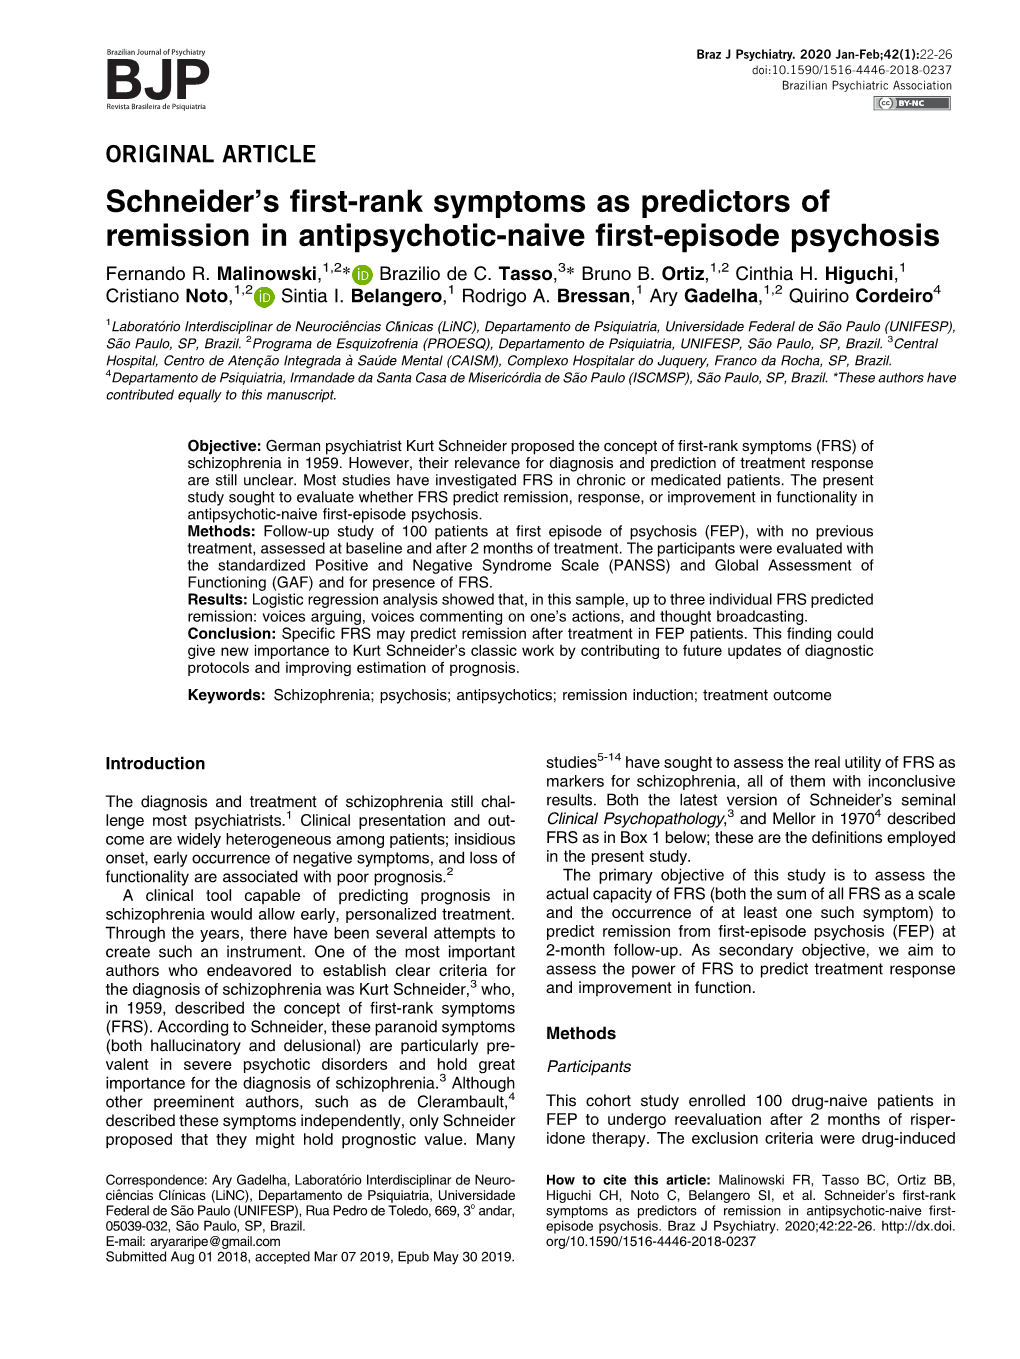 Schneider's First-Rank Symptoms As Predictors of Remission in Antipsychotic-Naive First-Episode Psychosis